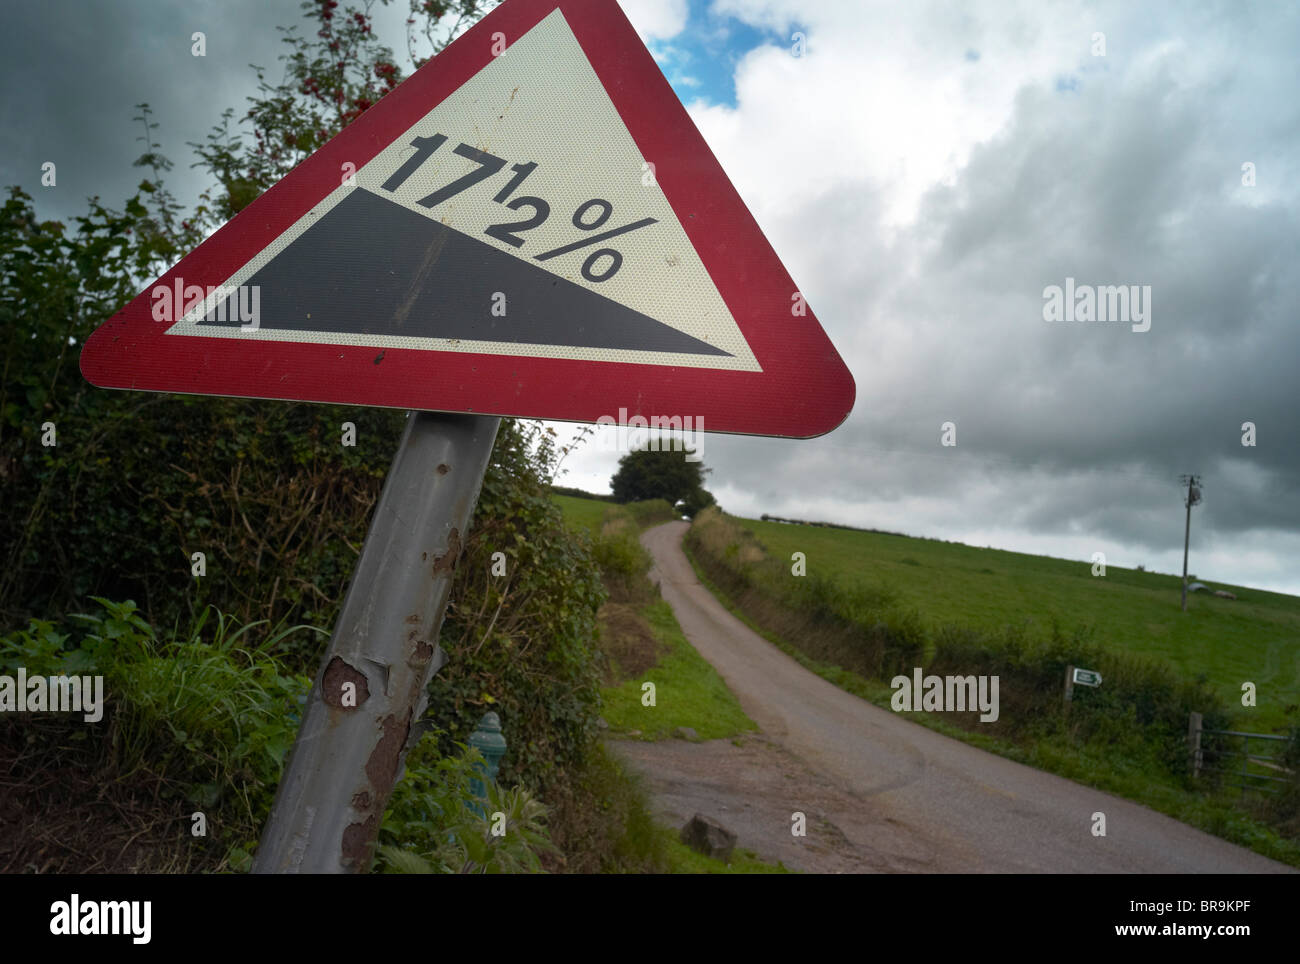 Road sign showing hill of 17.5% - VAT Tax will rise from 17.5% to 20% in the UK in Jan 2011 Stock Photo